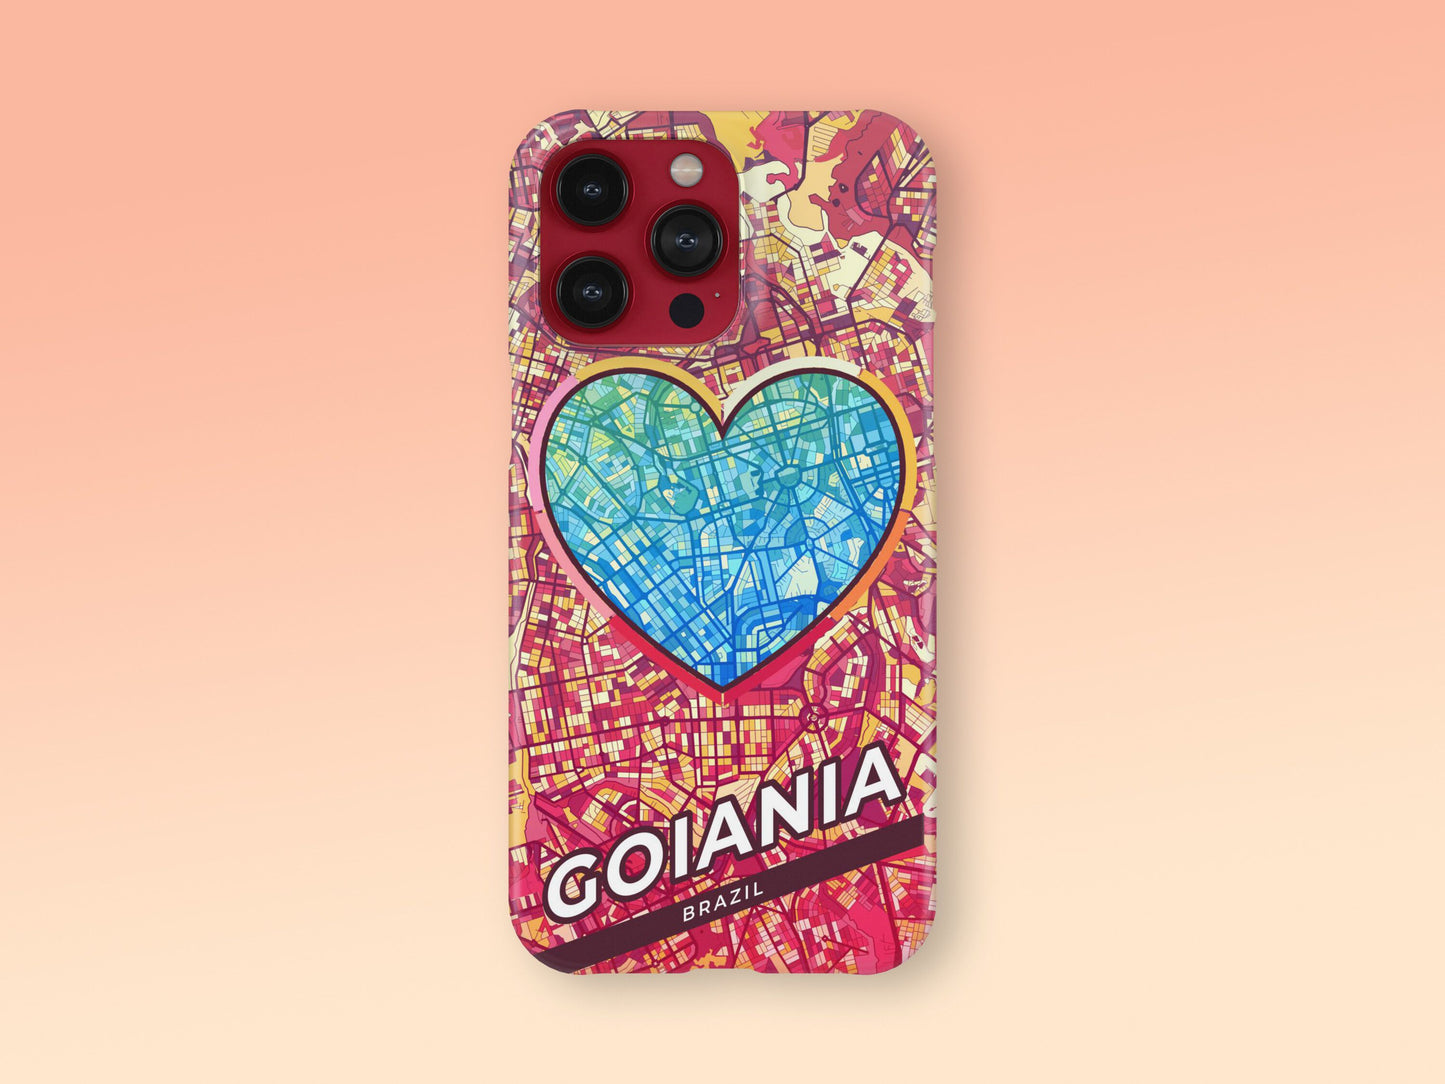 Goiania Brazil slim phone case with colorful icon. Birthday, wedding or housewarming gift. Couple match cases. 2